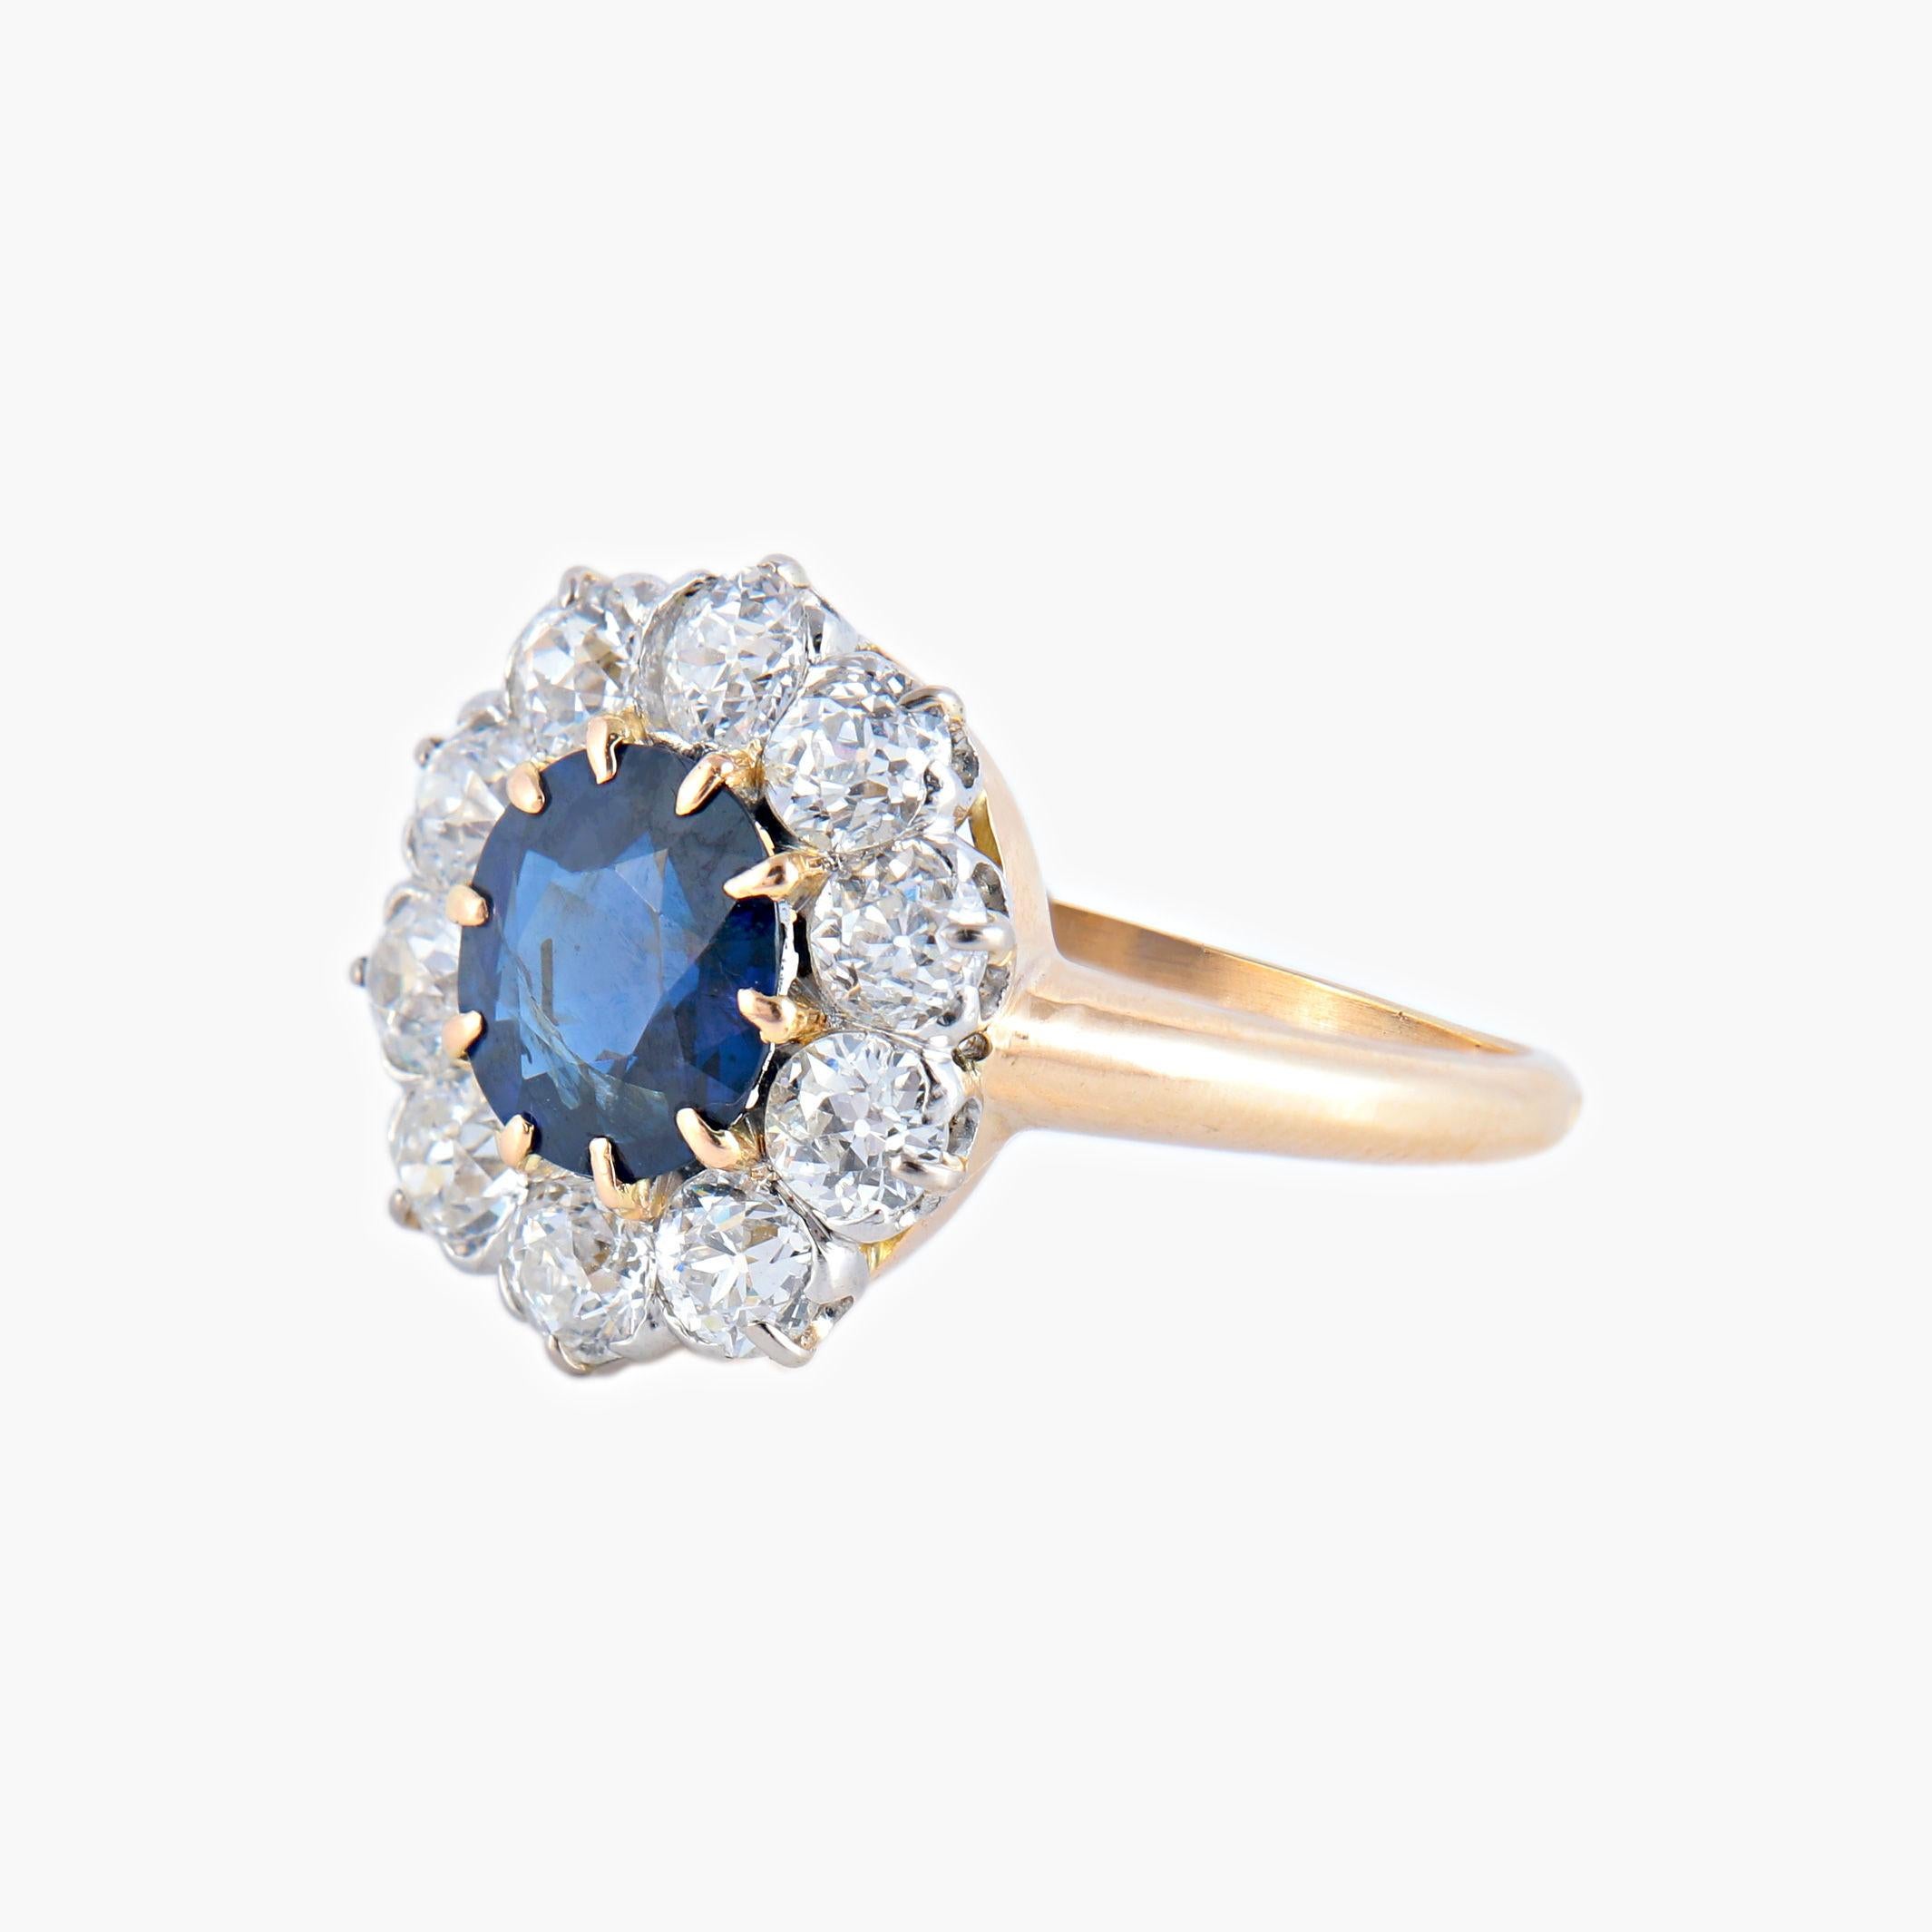 . Marguerite ring in 750/1000 yellow gold and platinum decorated in its center with a sapphire of approximately 2.5 carats surrounded by old-cut diamonds of approximately 1 carat.

. Finger size: 55

. Gross weight: 5 grams